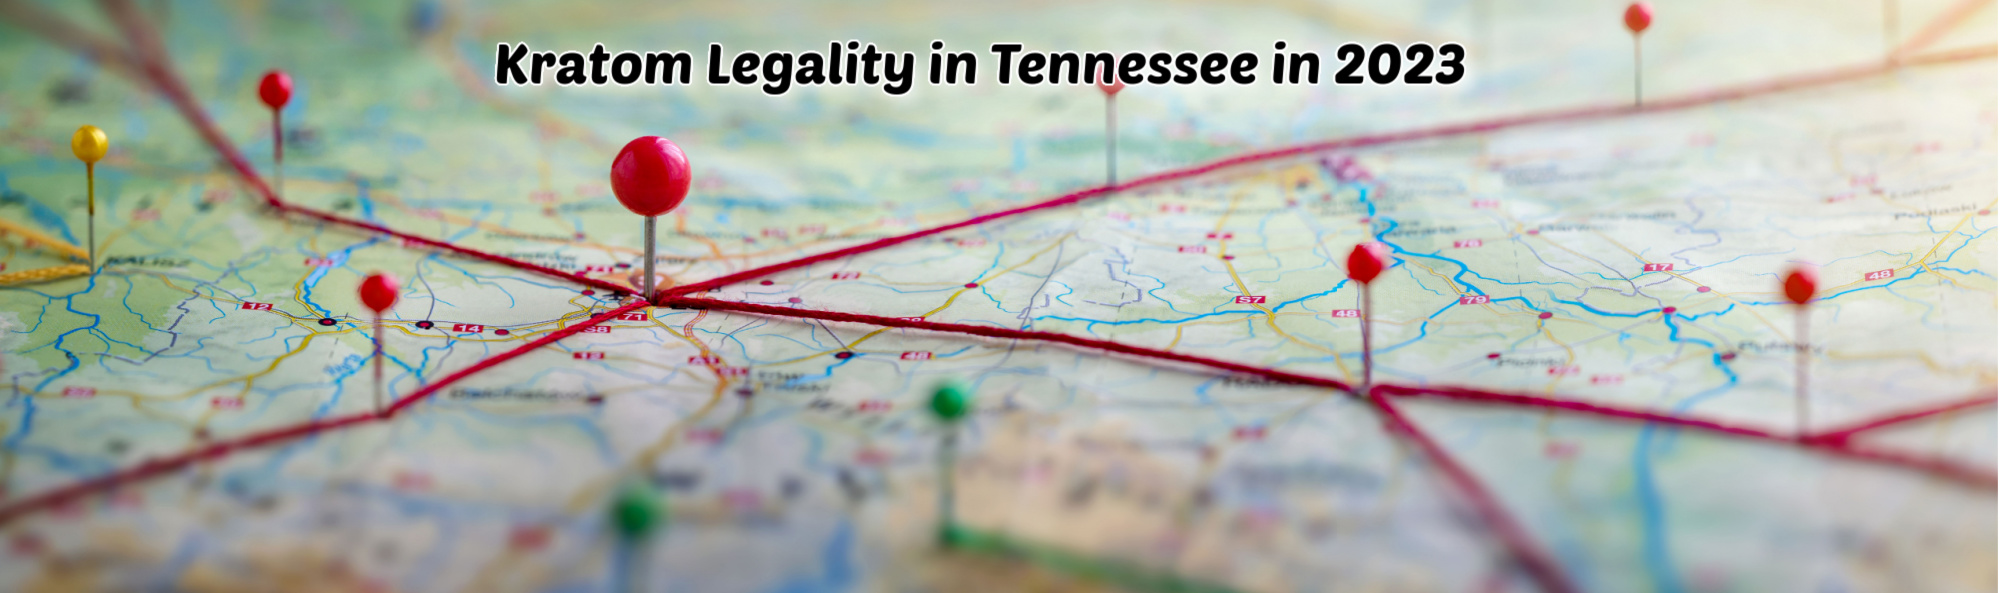 Is Kratom Legal in Tennessee? Its History and Current Status